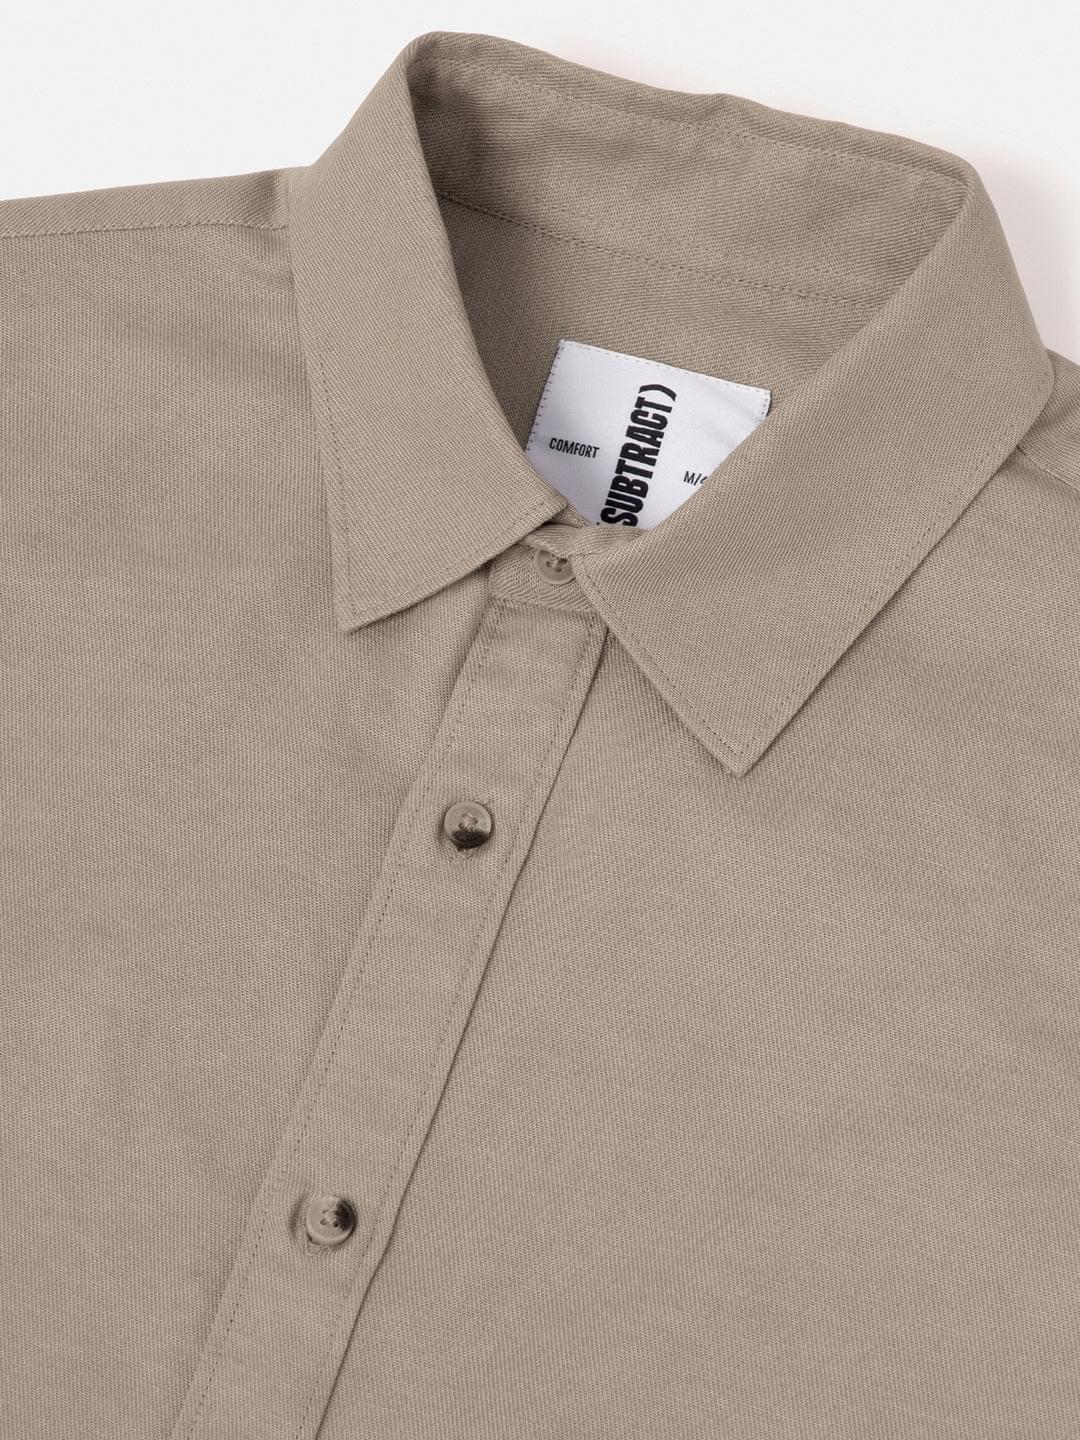 All Day Casual Cotton Linen Shirt in Khaki- Comfort Fit